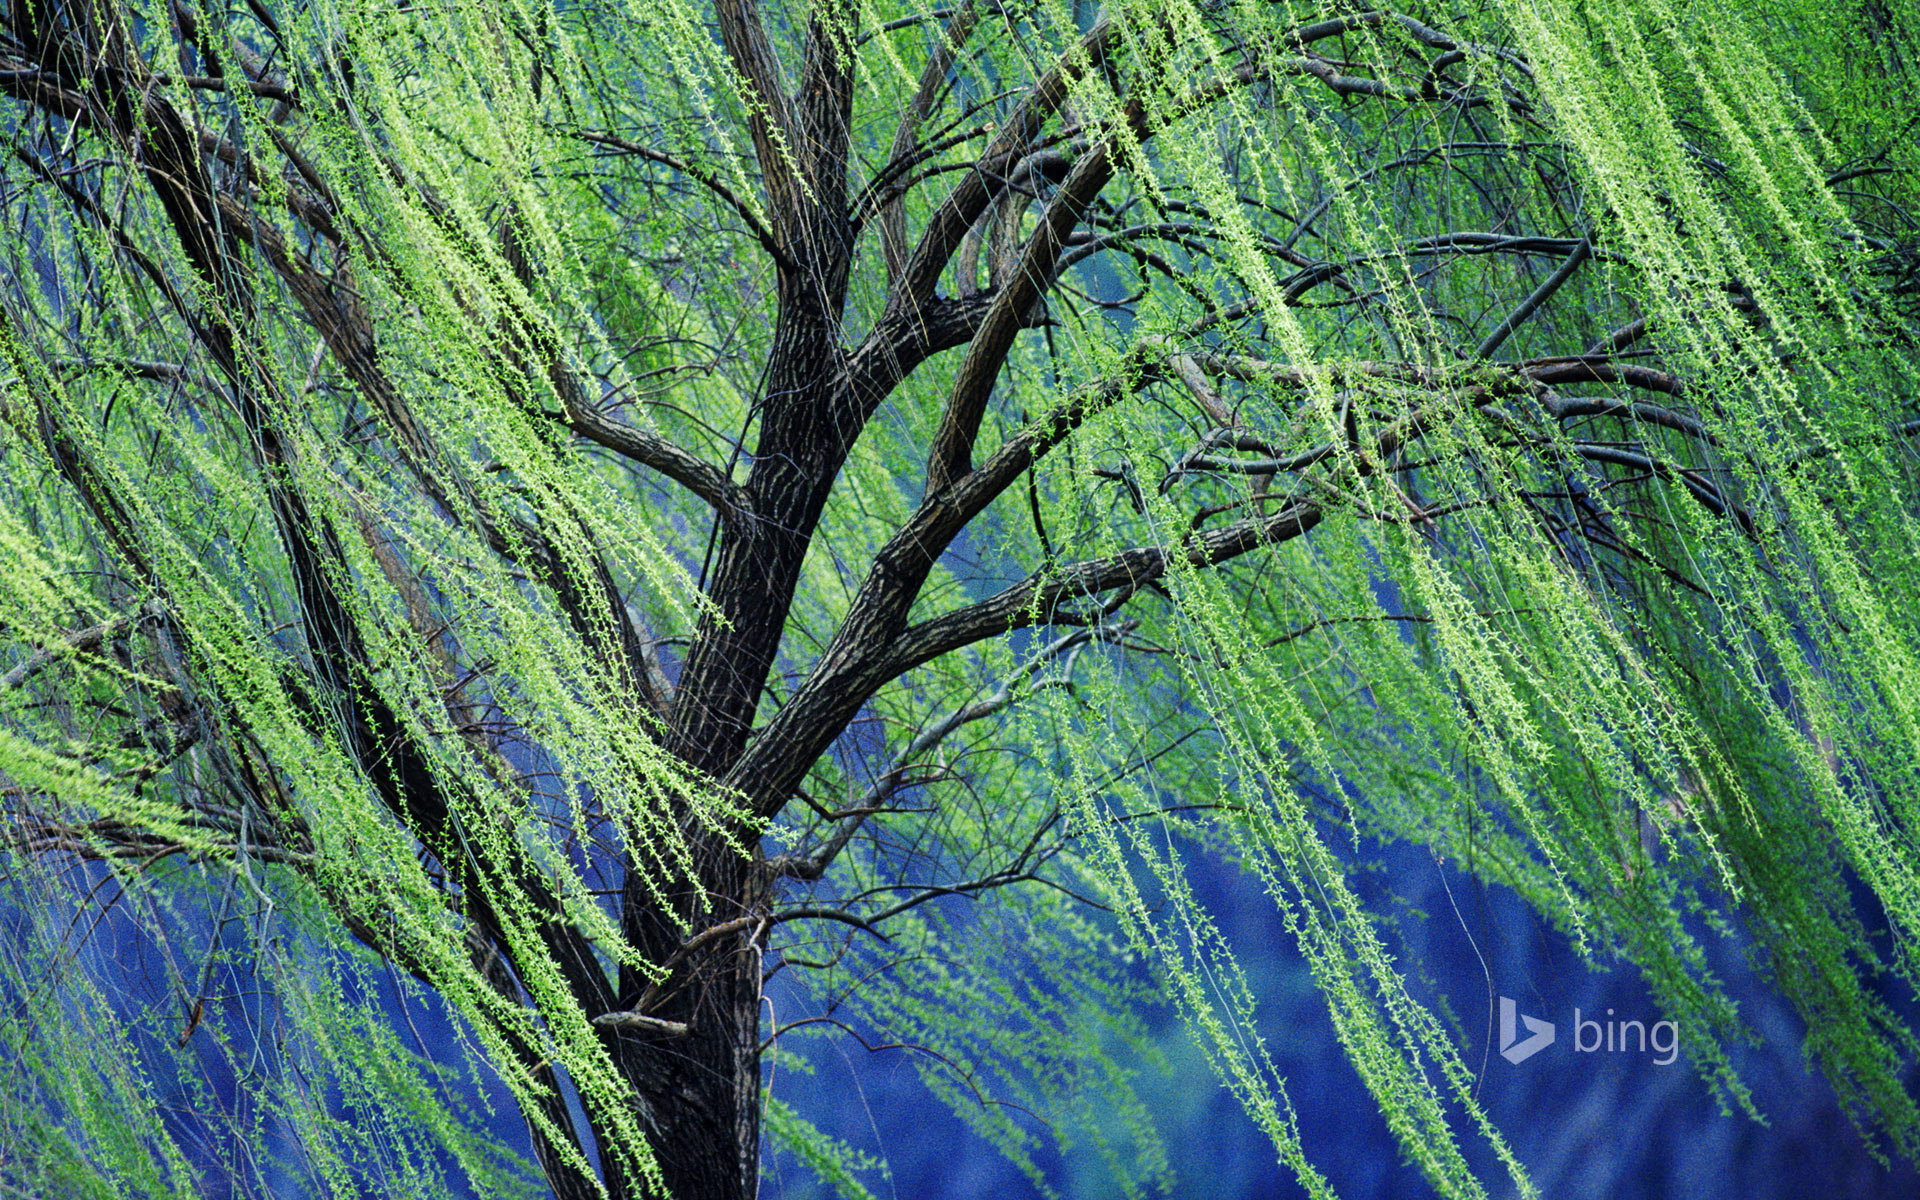 A weeping willow tree